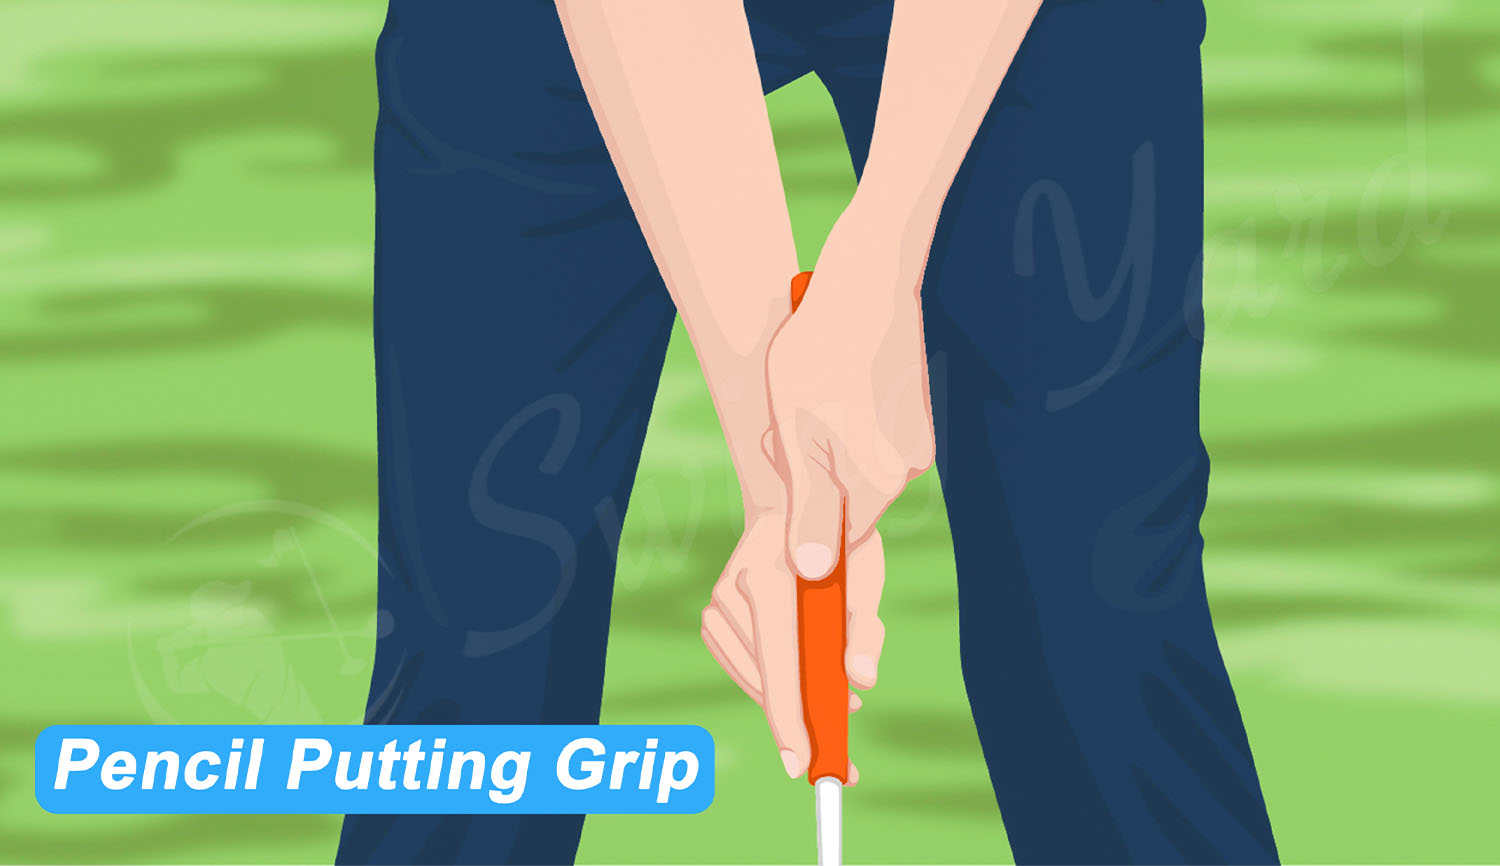 A golfer using the pencil putting grip